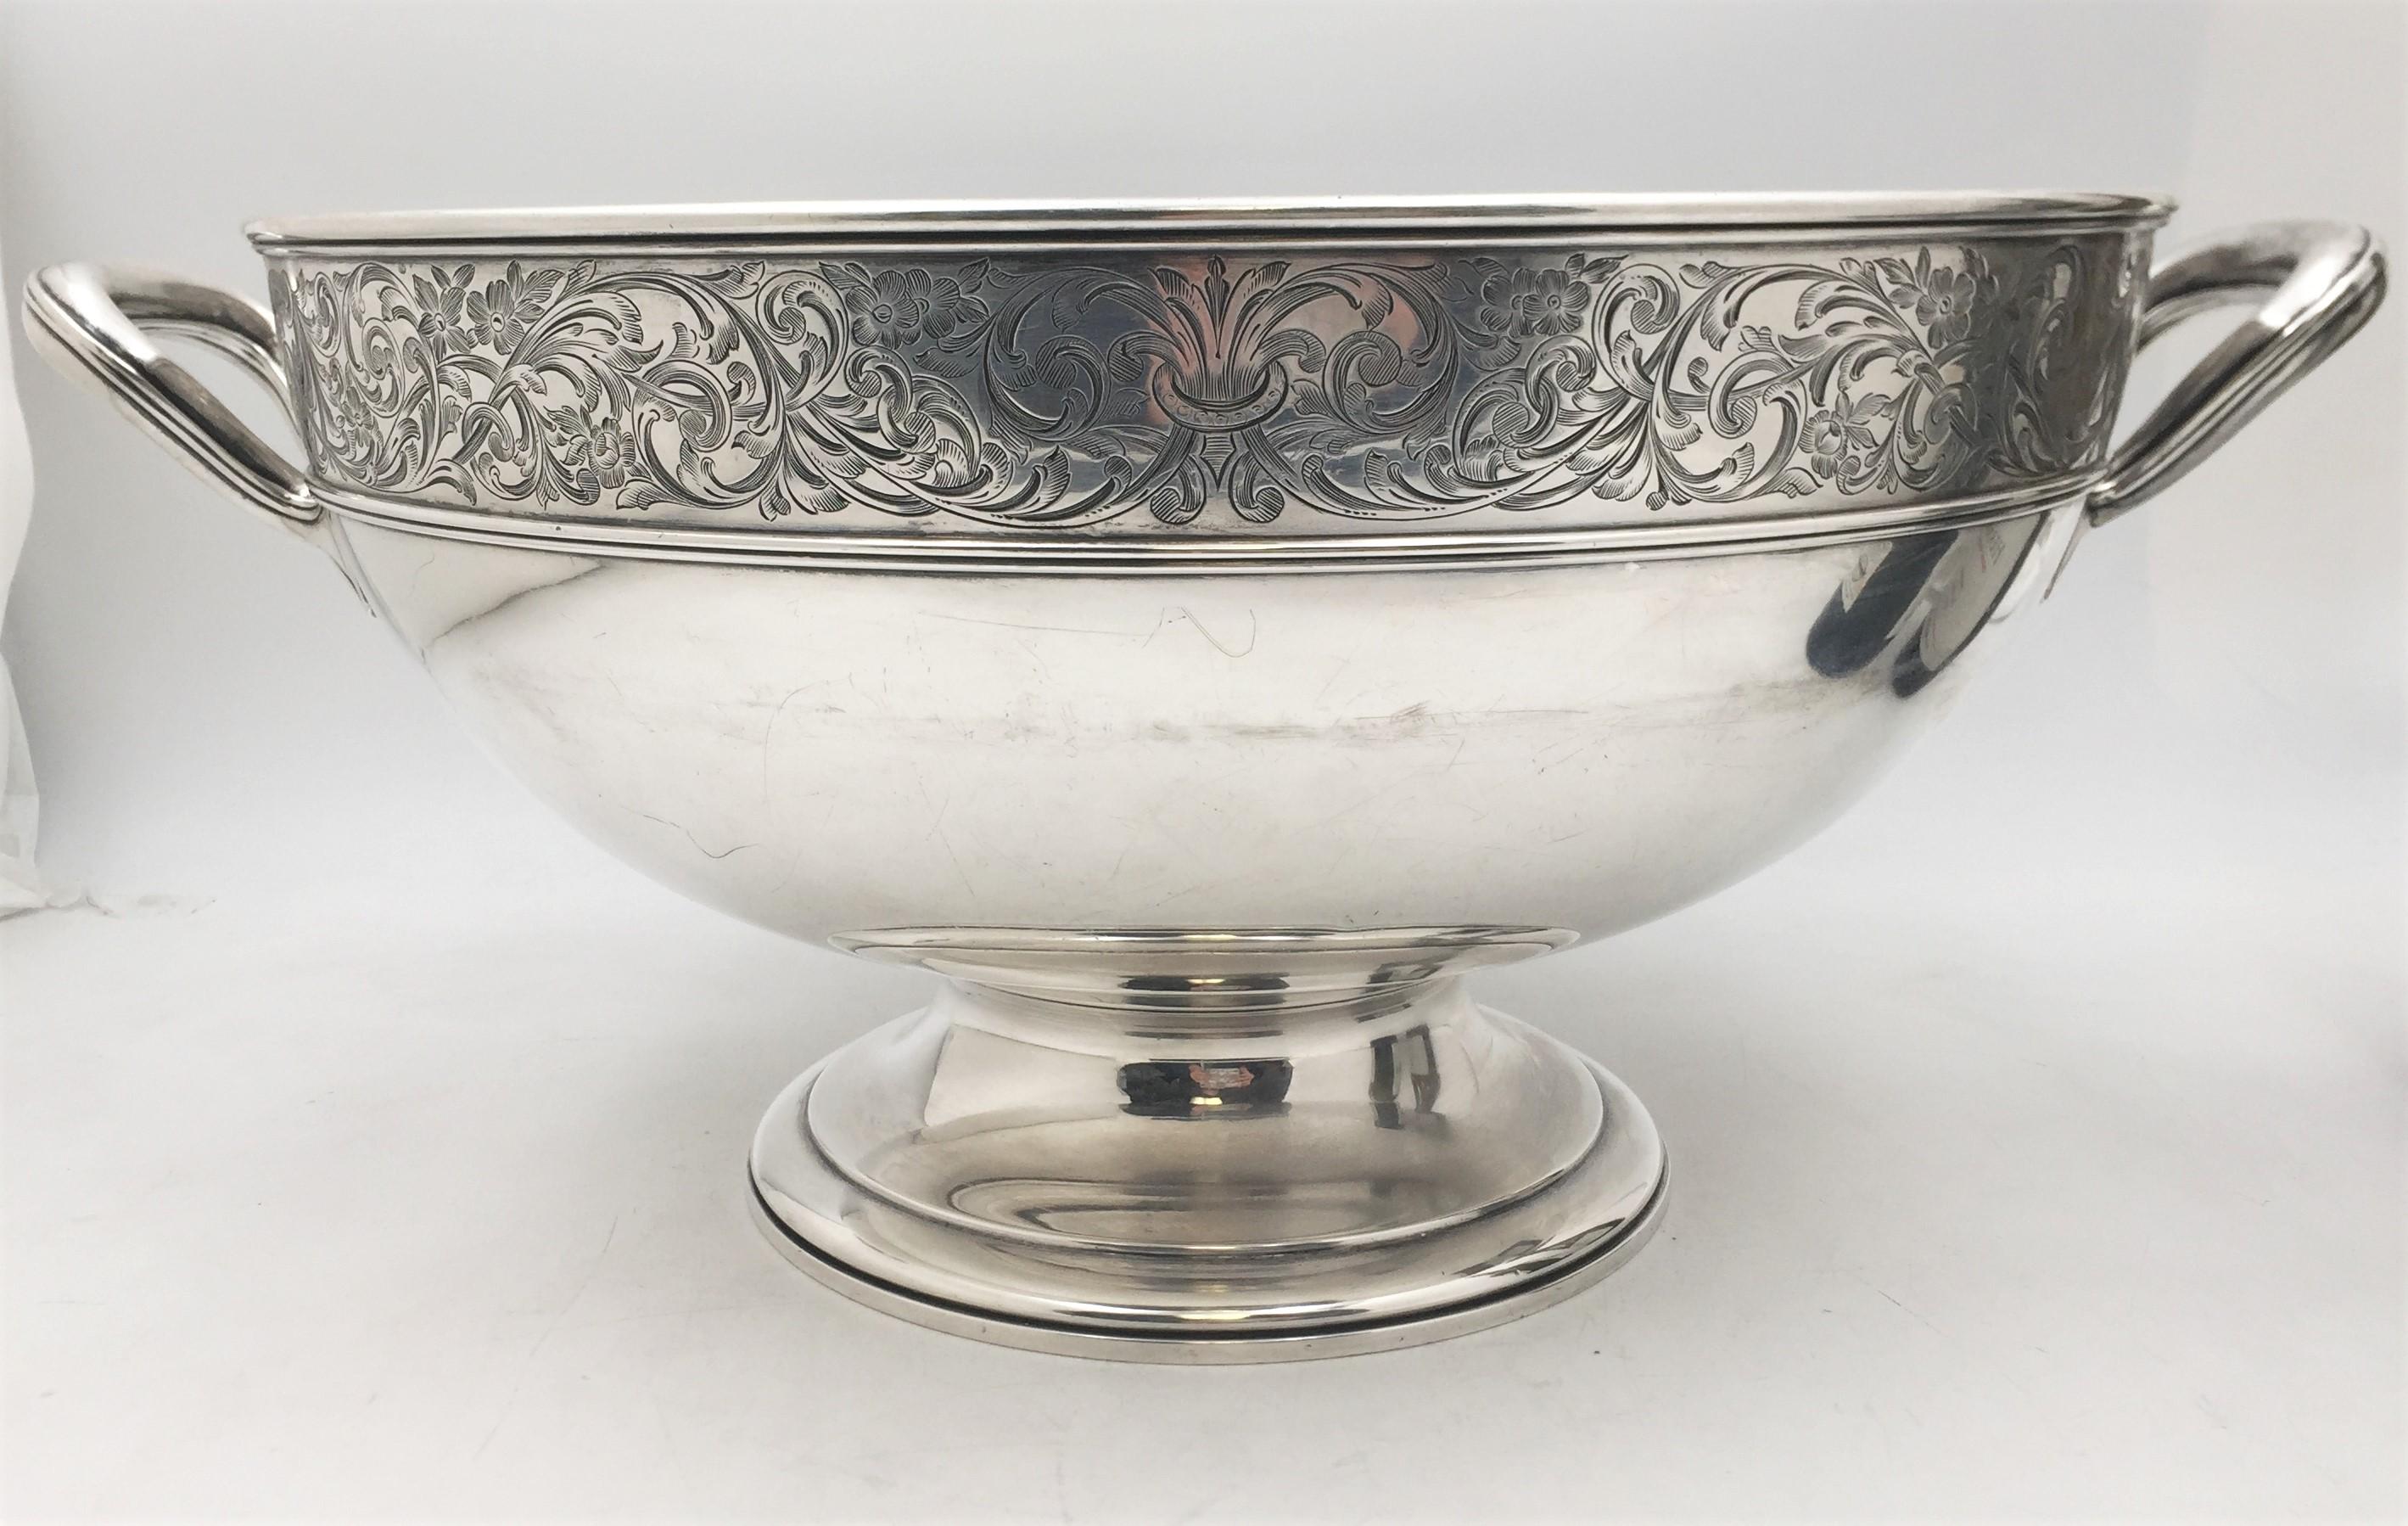 Monumental Gorham, sterling silver wine chiller or centerpiece bowl from 1908 with two handles decorated with a floral frieze across and bearing a dedicatory inscription to Seelye, the president of Smith College at the time. This impressive piece